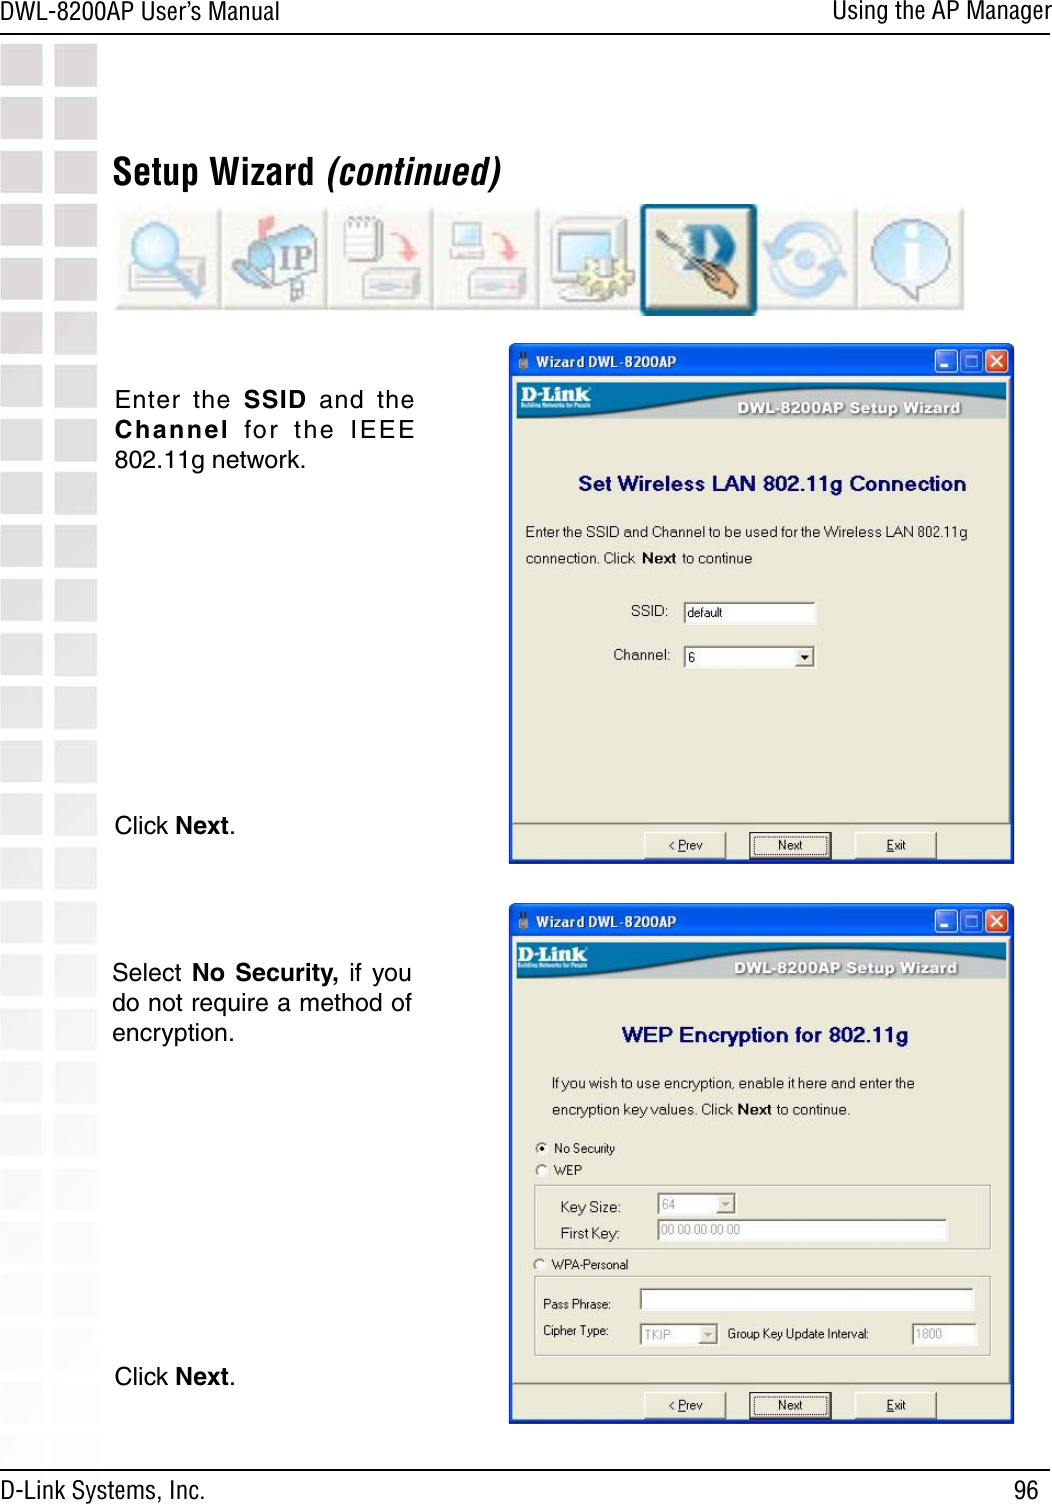 96DWL-8200AP User’s ManualD-Link Systems, Inc.Using the AP ManagerSetup Wizard (continued)Enter  the  SSID  and  the Channel  for  the  IEEE 802.11g network.Click Next.Select  No  Security,  if  you do not require a method of encryption.Click Next.